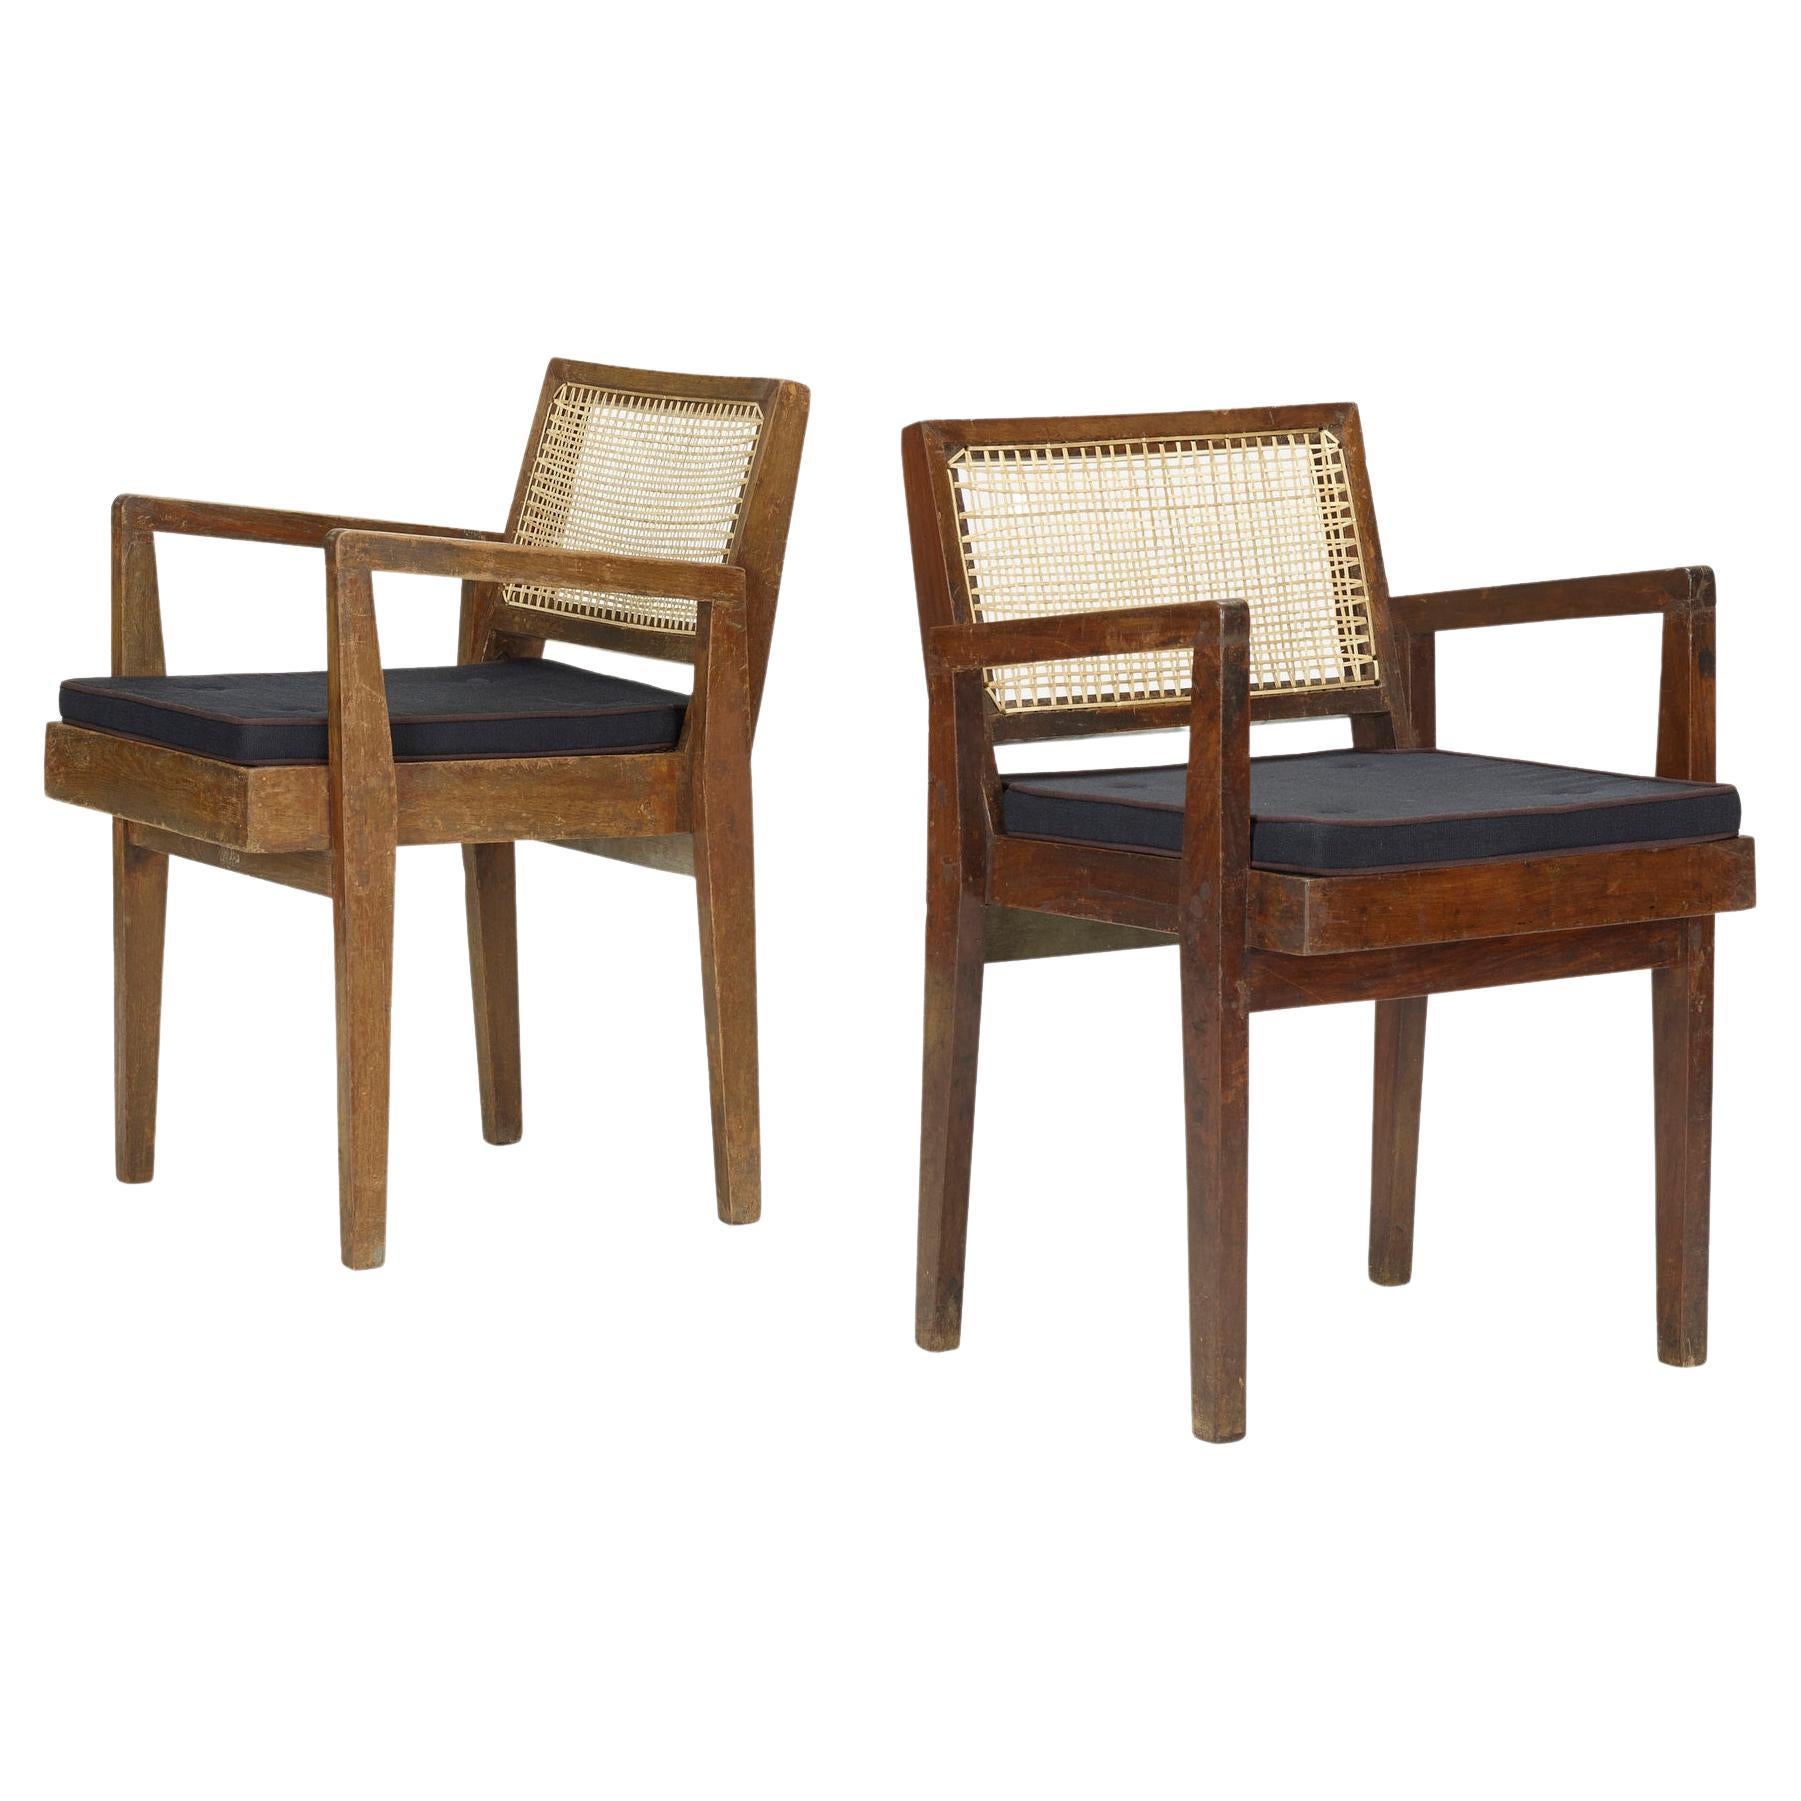 Pierre Jeanneret Armchairs from Chandigarh, pair, c. 1955